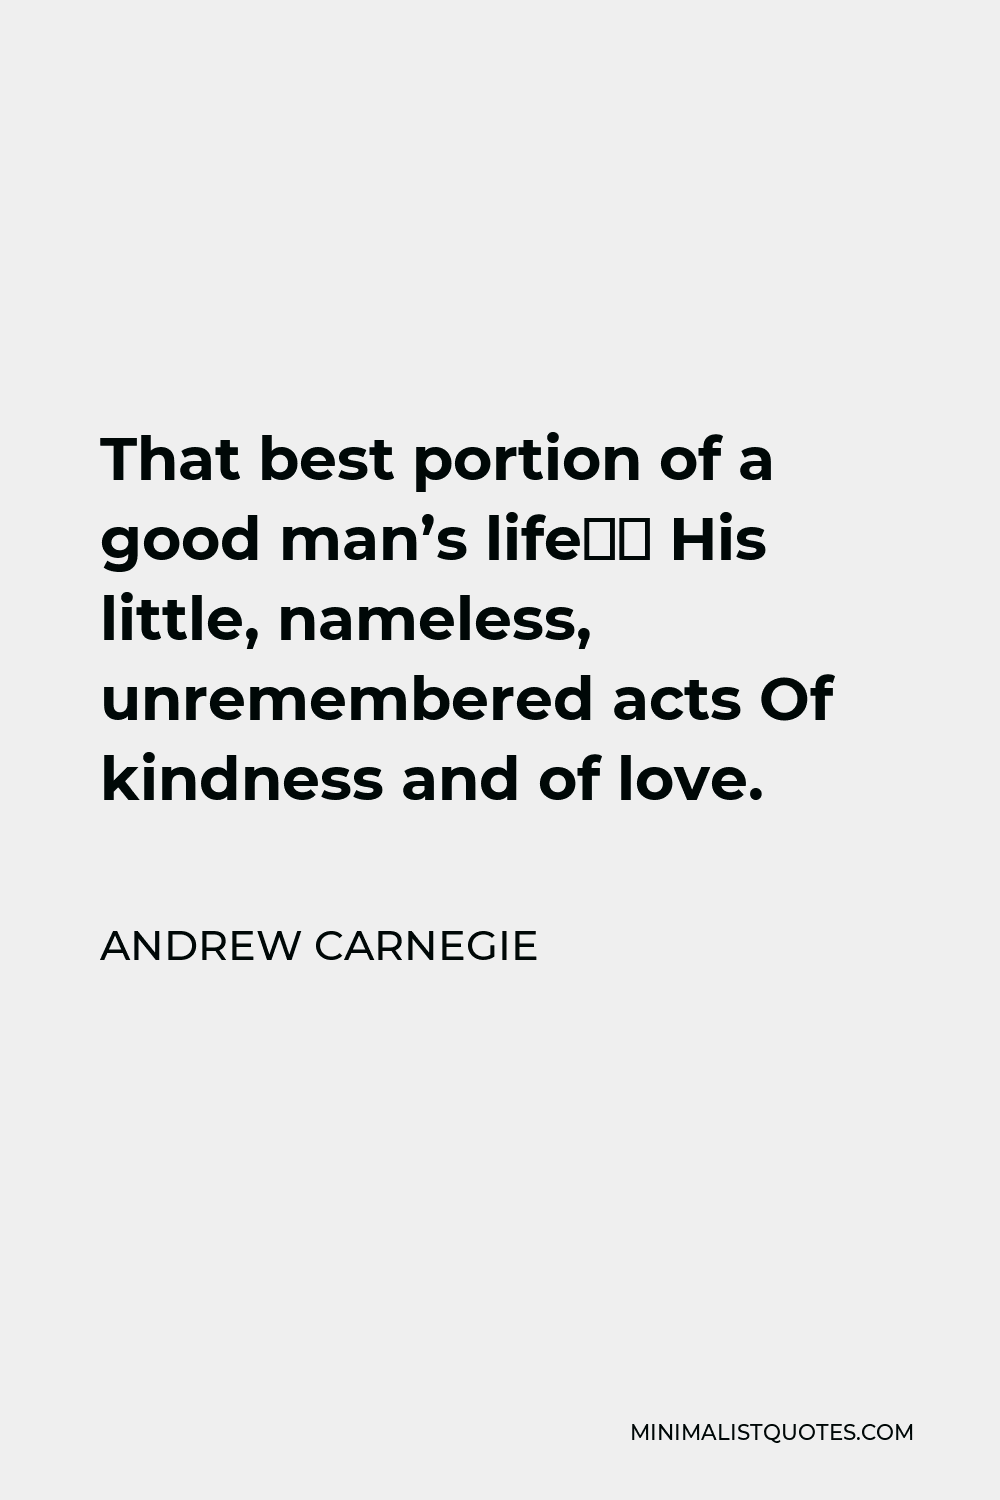 Andrew Carnegie Quote - That best portion of a good man’s life— His little, nameless, unremembered acts Of kindness and of love.